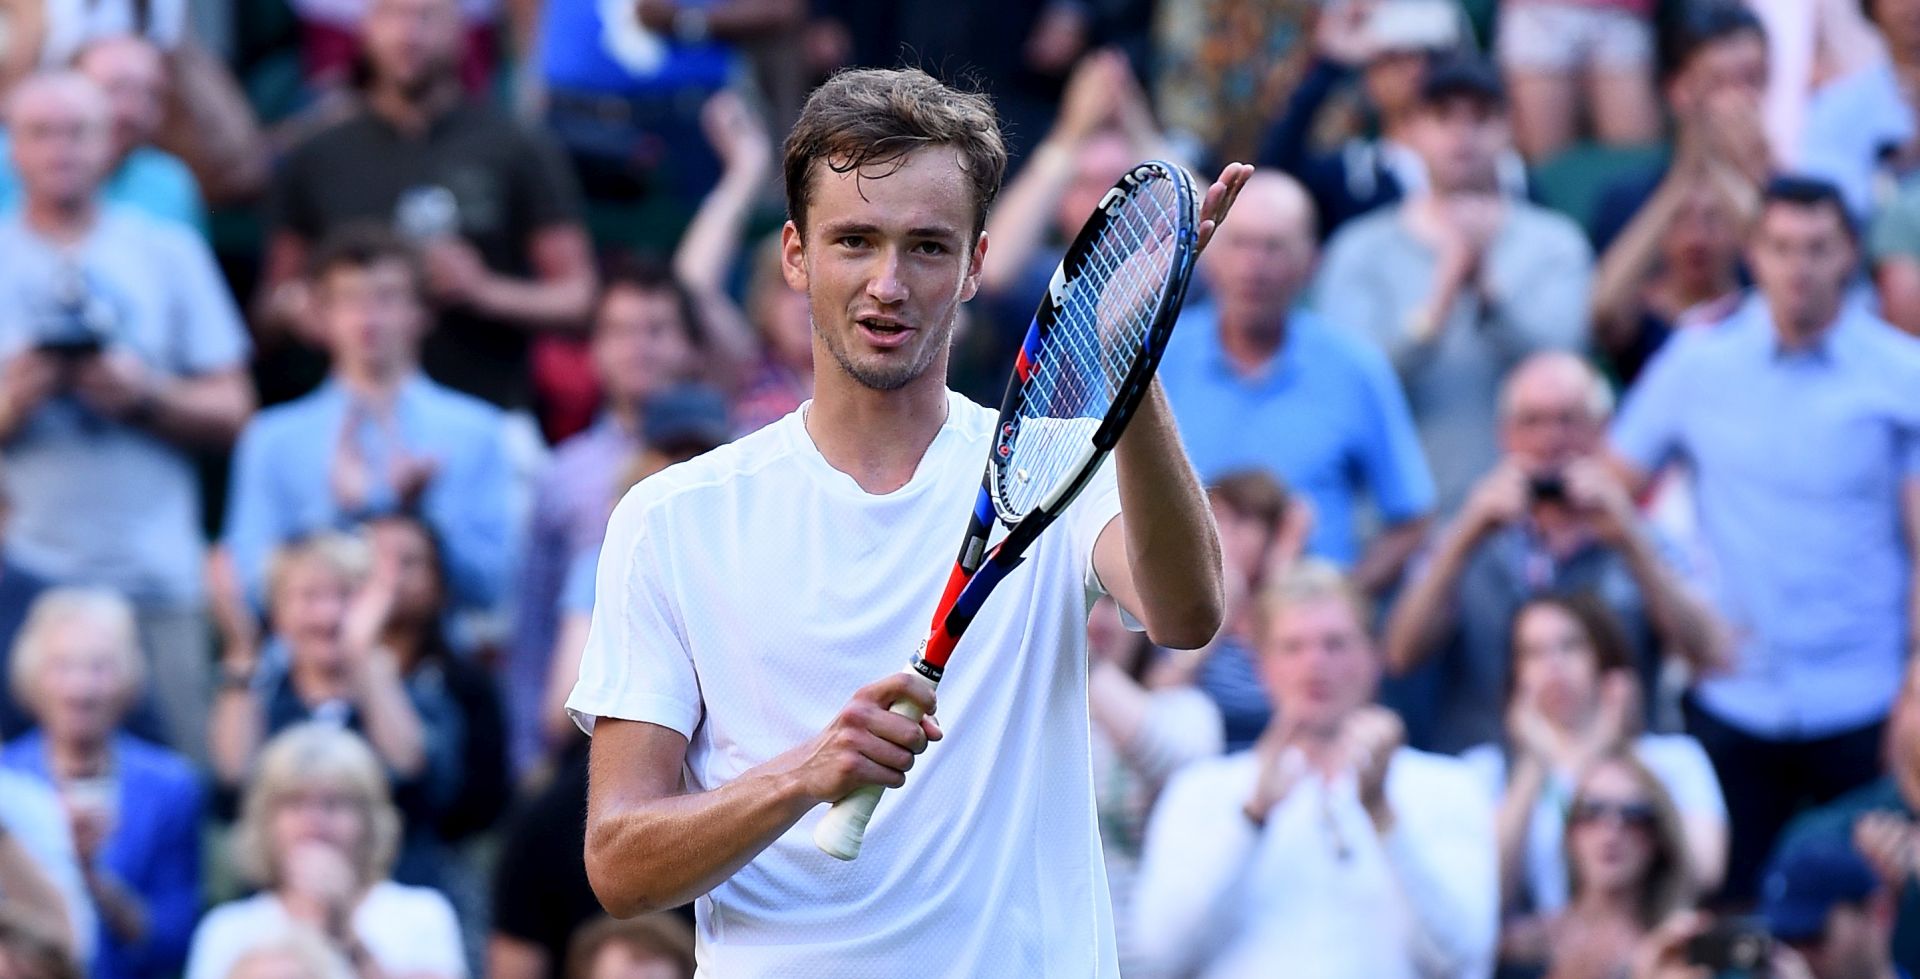 epa06064164 Daniil Medvedev of Russia celebrates winning against Stan Wawrinka of Switzerland during their first round match for the Wimbledon Championships at the All England Lawn Tennis Club, in London, Britain, 03 July 2017.  EPA/GERRY PENNY EDITORIAL USE ONLY/NO COMMERCIAL SALES